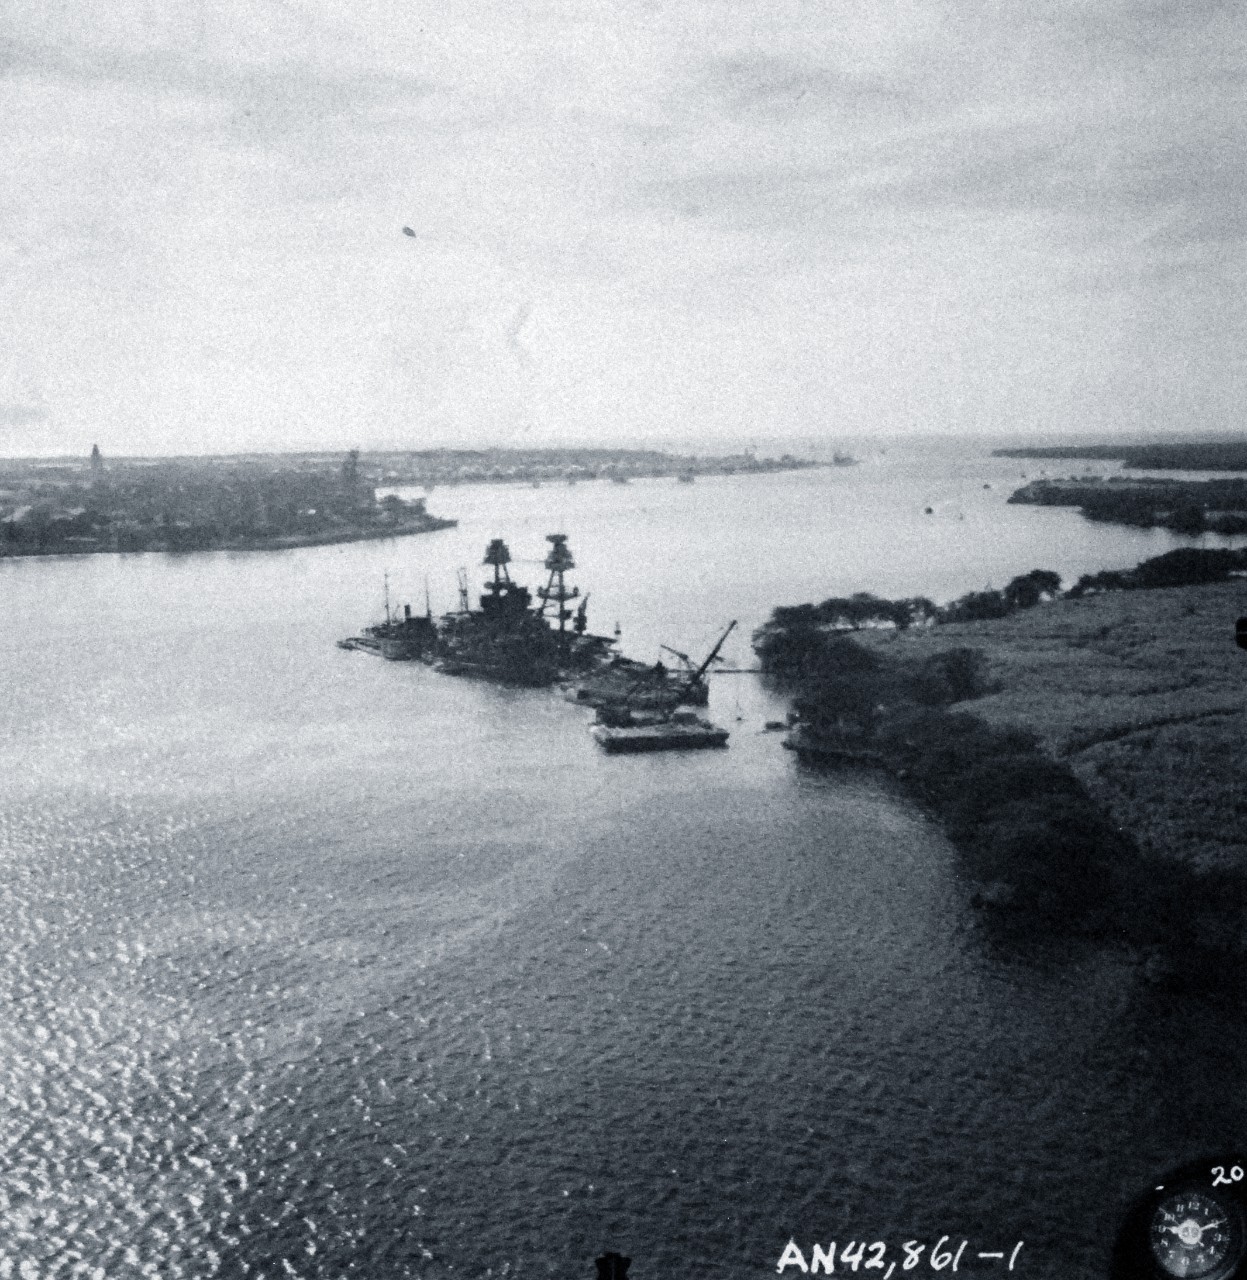 80-G-387563:  Japanese Attack at Pearl Harbor, December 7, 1941.   Aerial view of "Battleship Row" moorings on the southern side of Ford Island, 10 December 1941, showing damage from the Japanese raid three days earlier.  Battleship shown is USS Nevada (BB 36).  Photographed by VJ-1 at an altitude of 3,000 feet and released November 9, 1950. U.S. Navy photograph, now in the collections of the National Archives (9/22/2015).